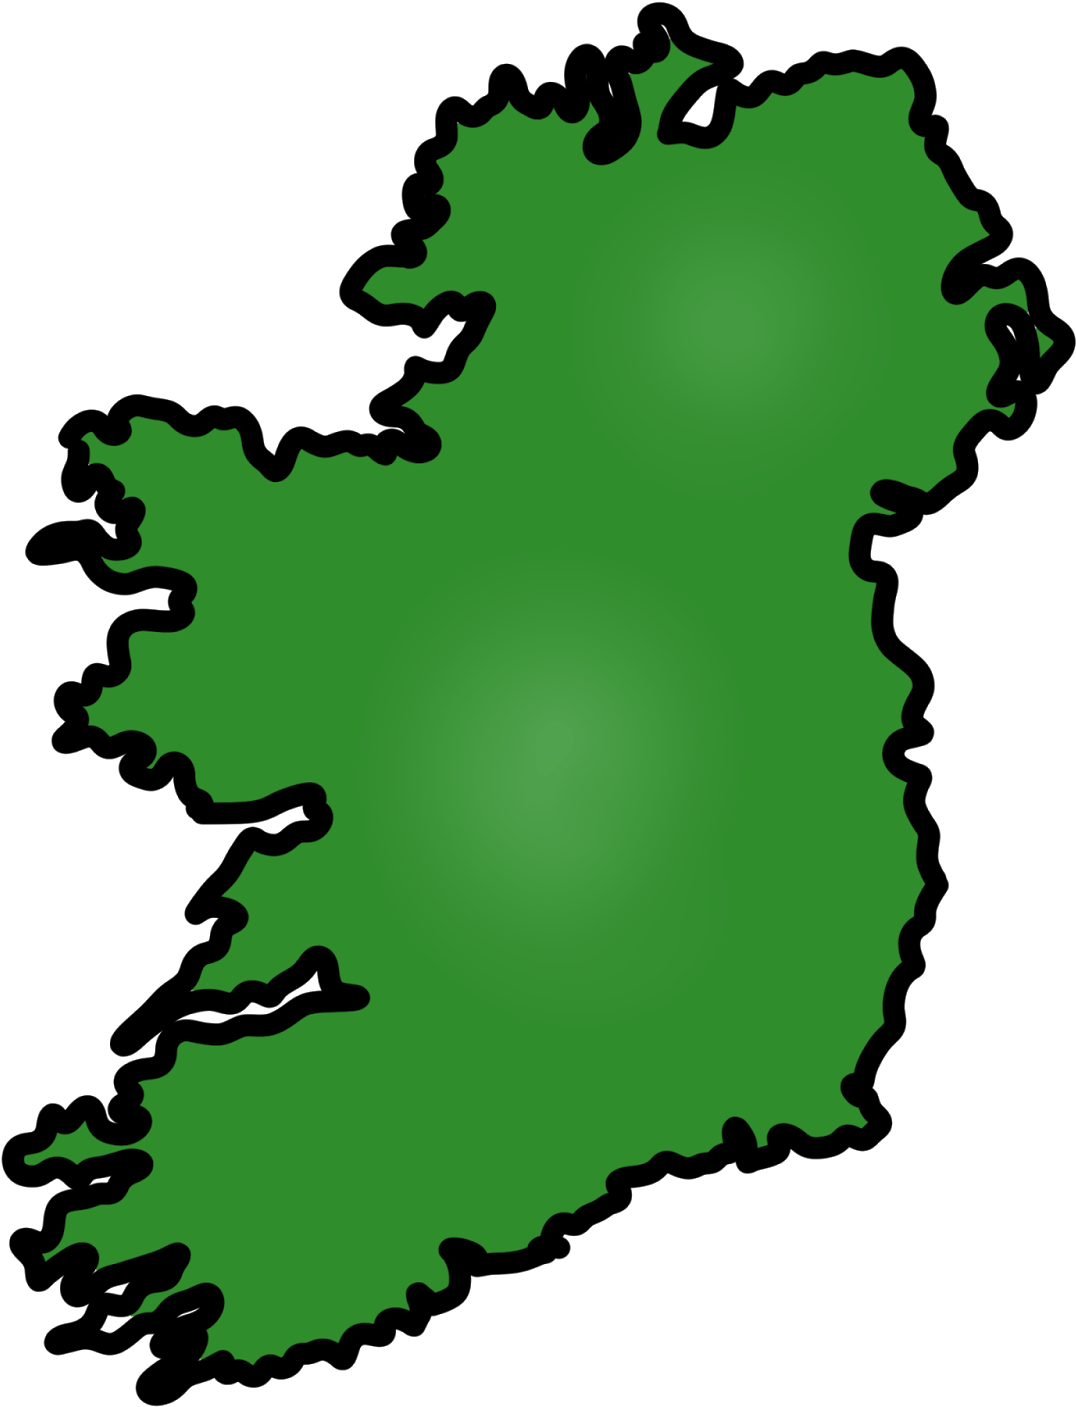 Simple Irish Map Free Cliparts That You Can Download - Ireland Clipart (1200x1600)